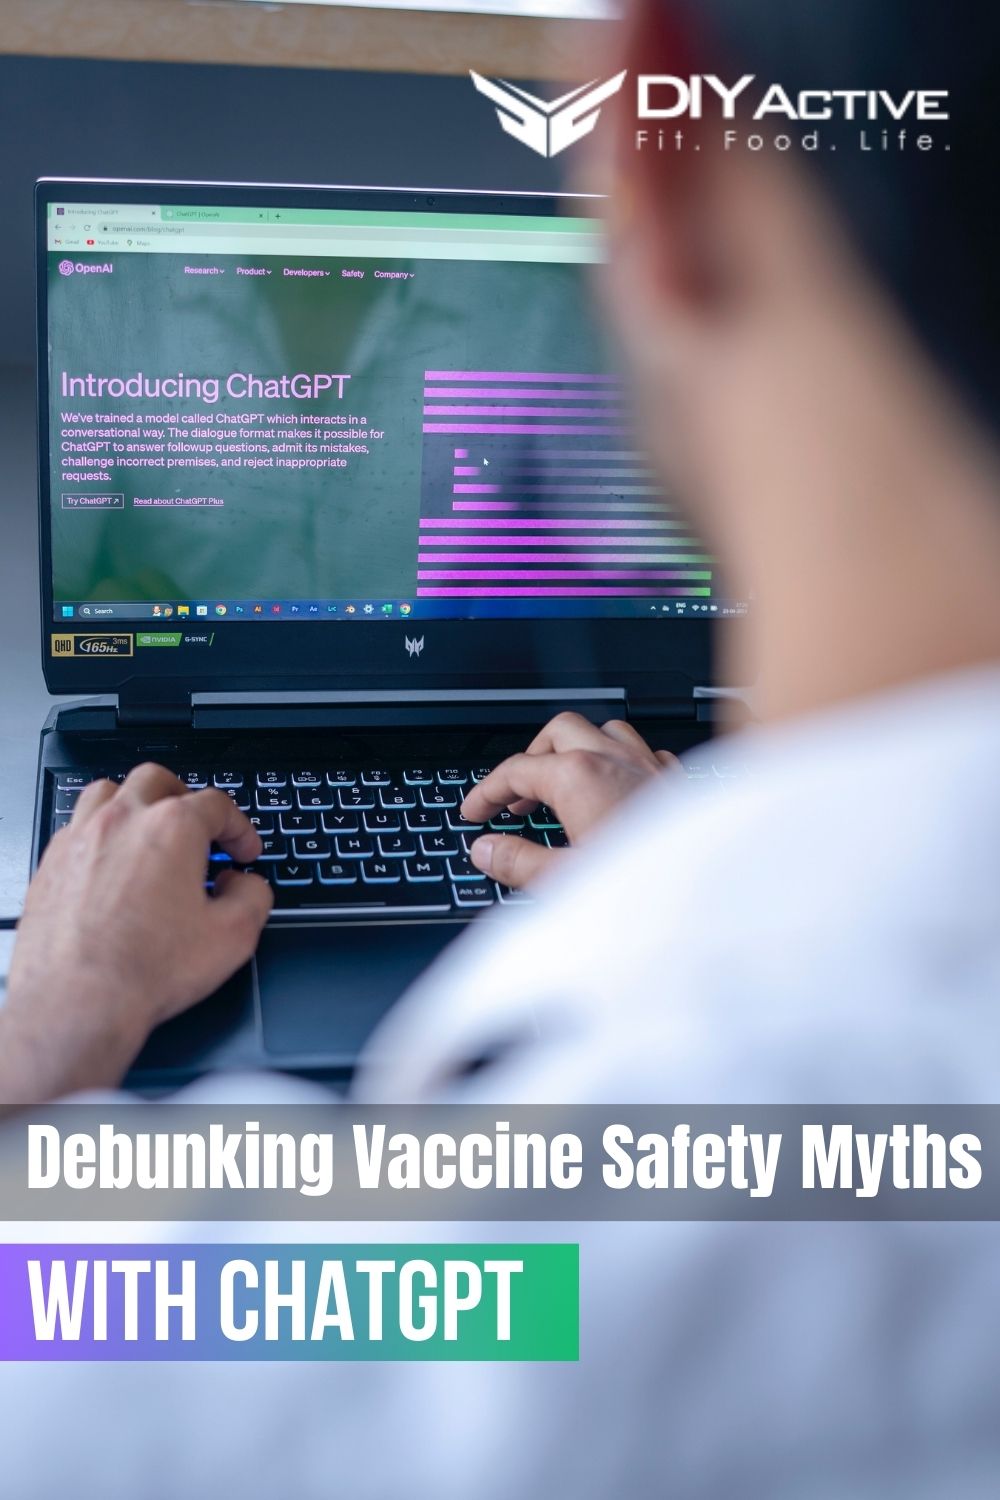 ChatGPT The AI Revolution in Debunking Vaccine Safety Myths 2